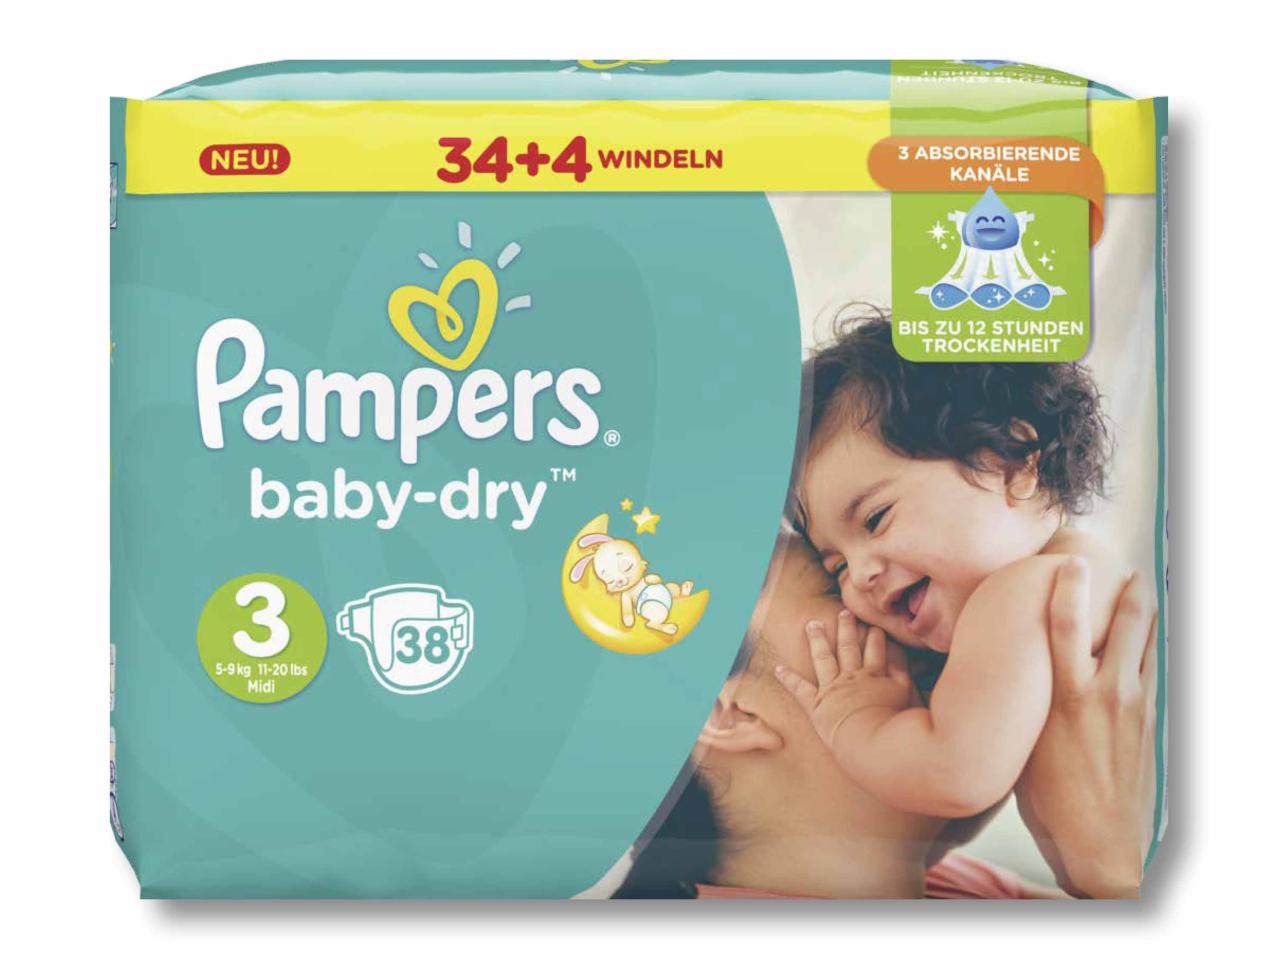 Pannolini Pampers Baby-dry